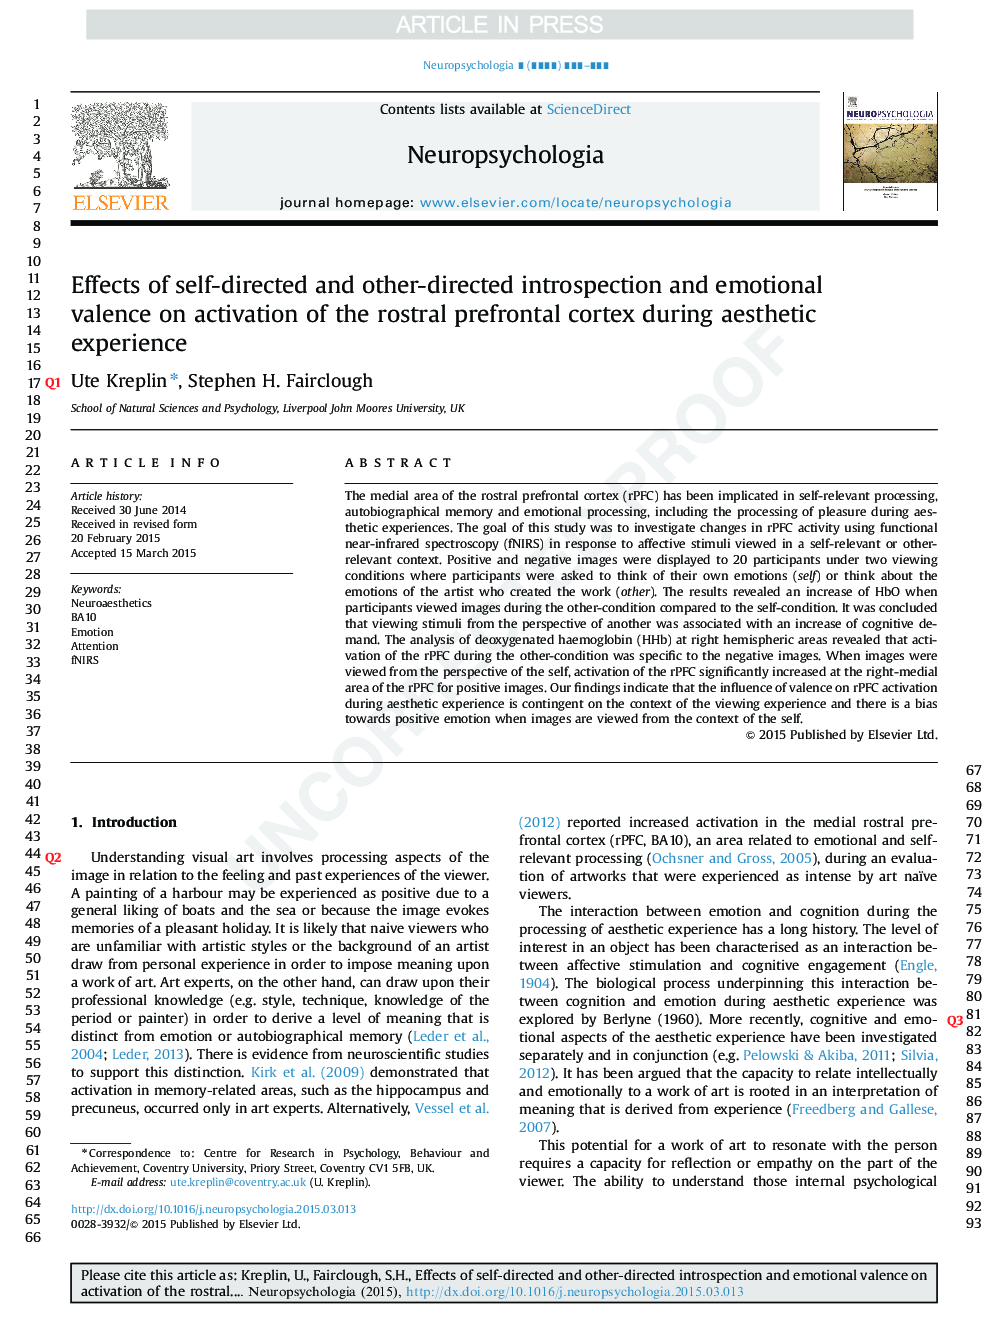 Effects of self-directed and other-directed introspection and emotional valence on activation of the rostral prefrontal cortex during aesthetic experience